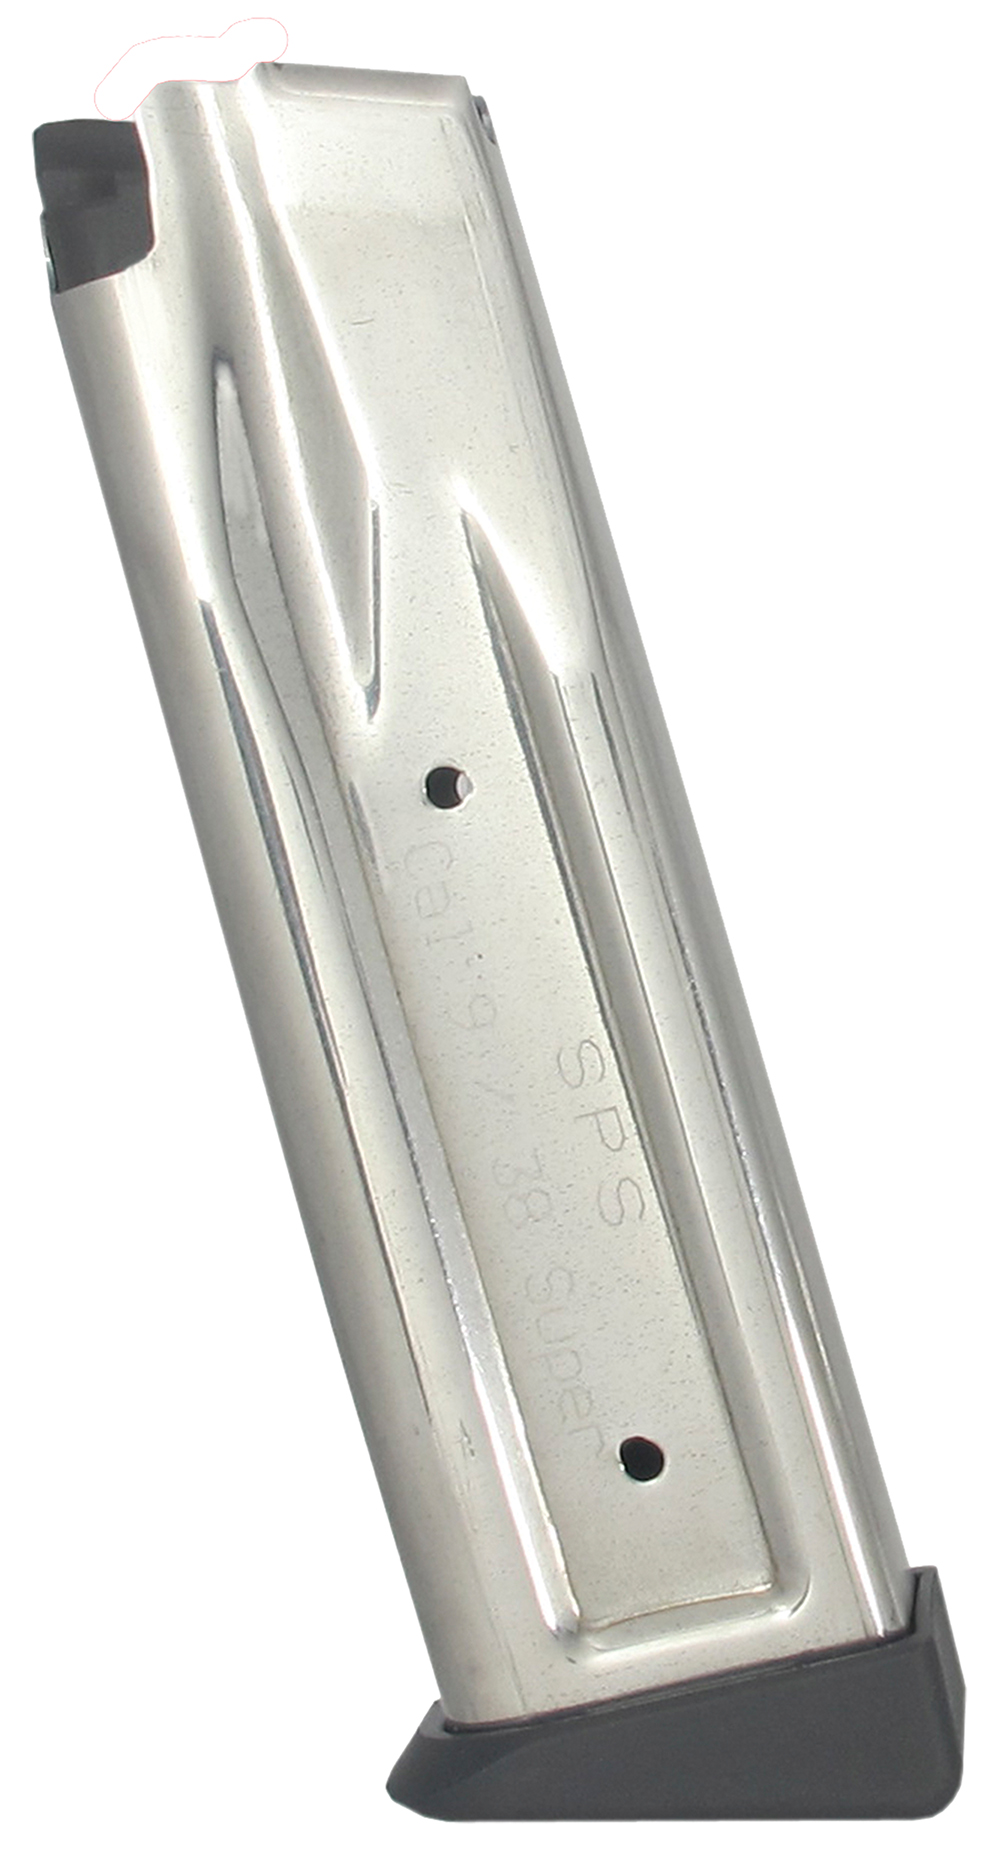 SPS MG120-45 3011 Magazine 12RD 45ACP Stainless Steel